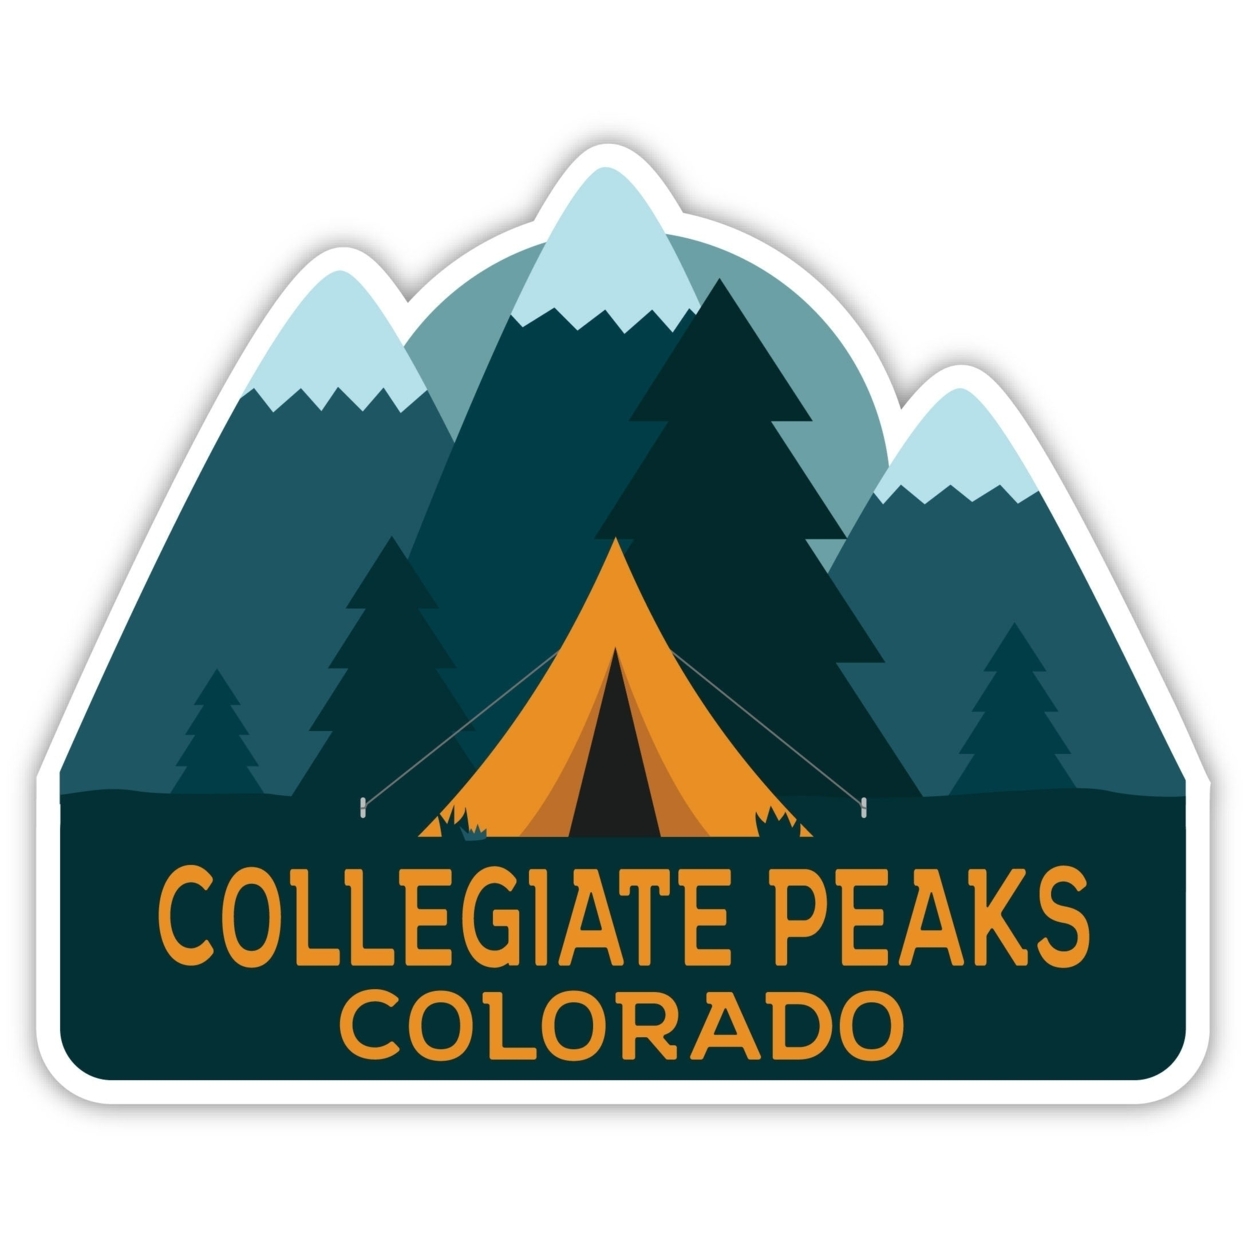 Collegiate Peaks Colorado Souvenir Decorative Stickers (Choose Theme And Size) - 4-Pack, 6-Inch, Great Outdoors